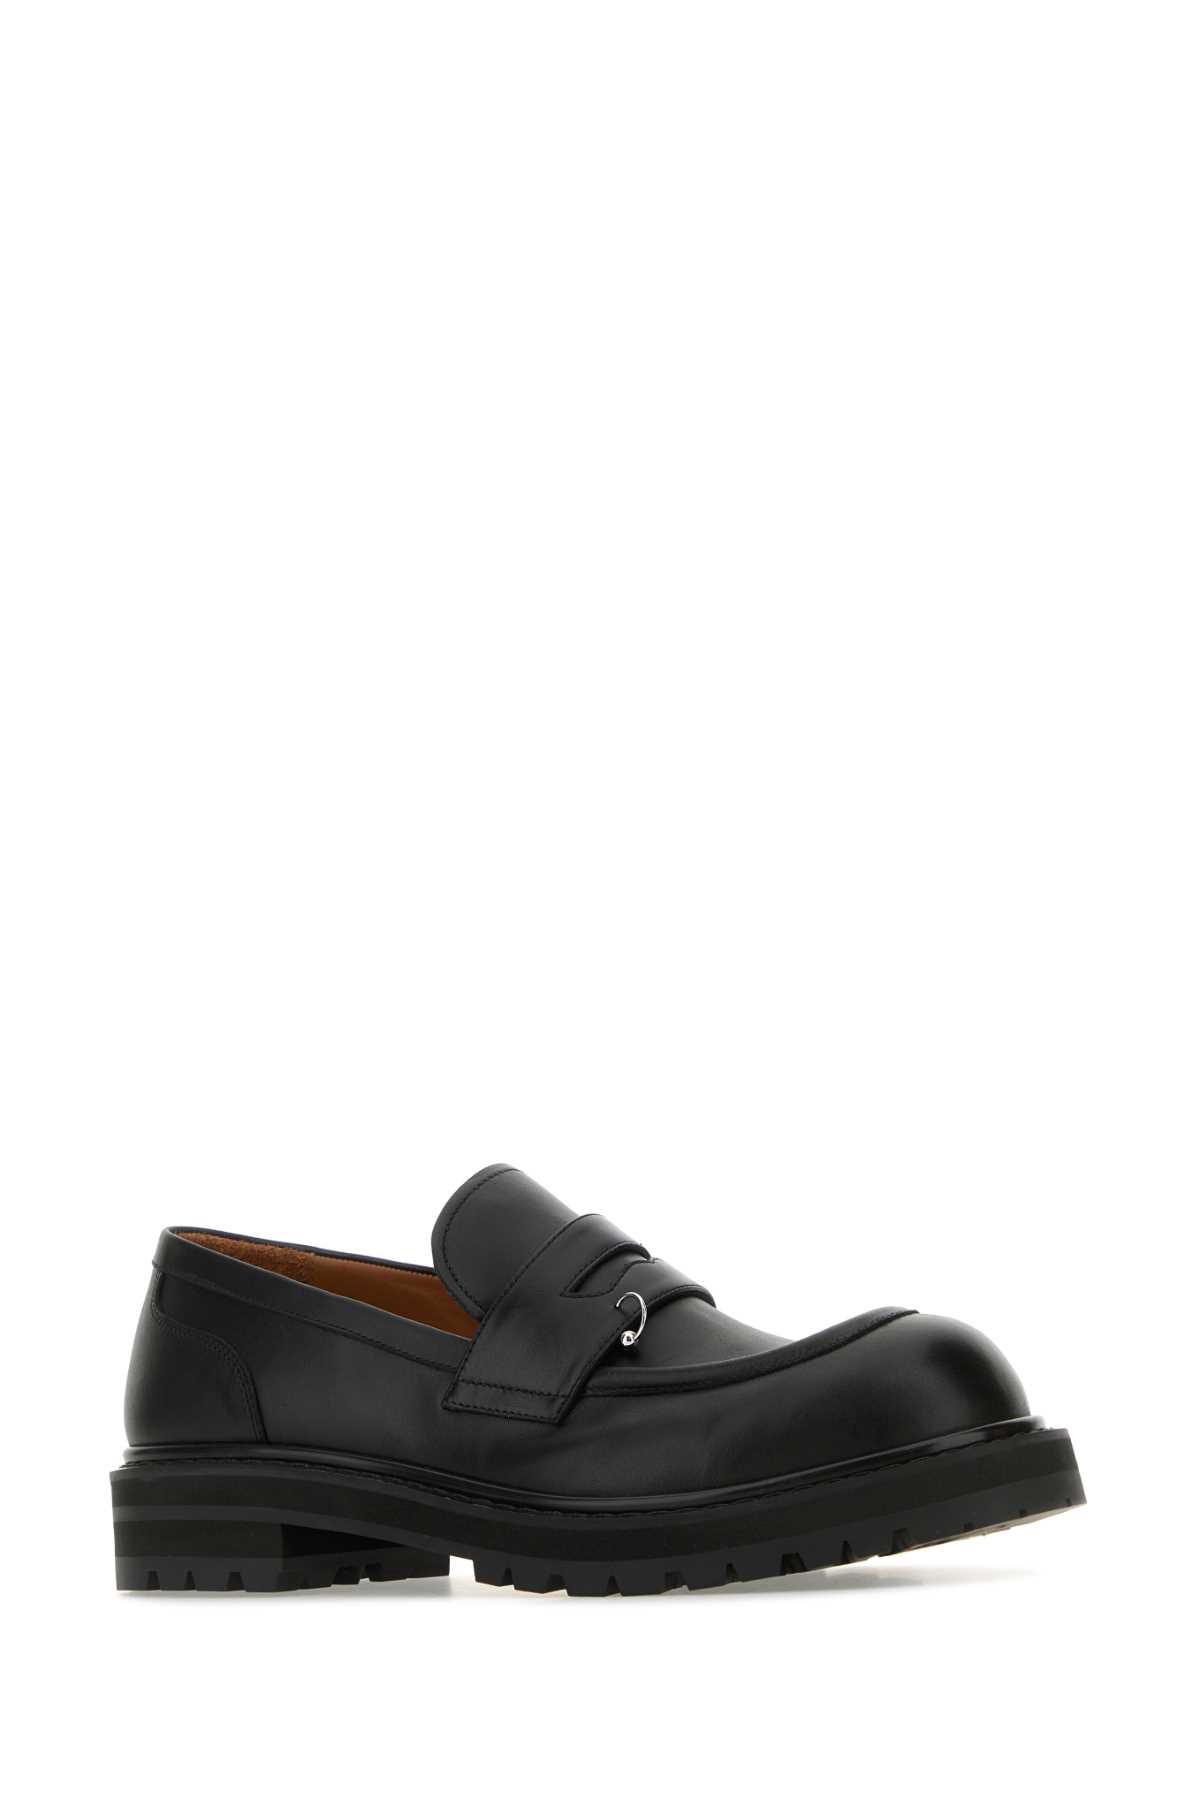 Shop Marni Black Leather Loafers